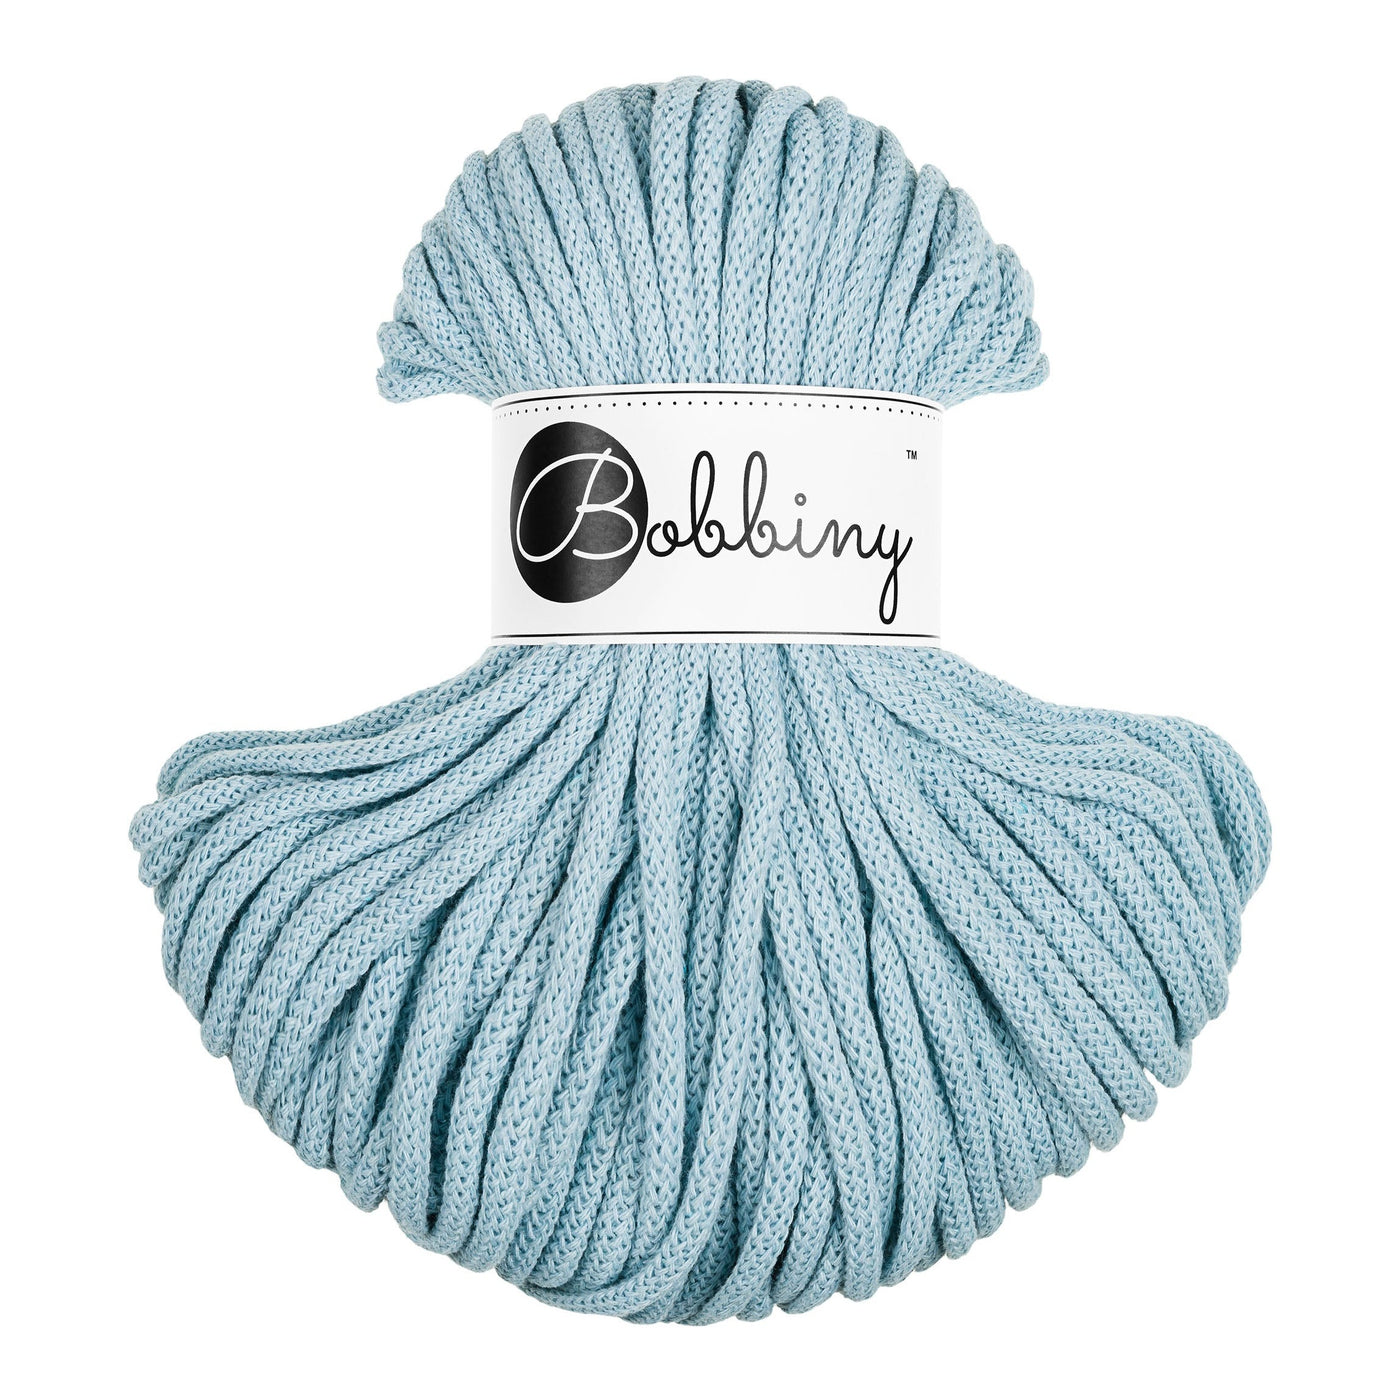 Bobbiny braided cord 5mm 50m in Misty blue shade